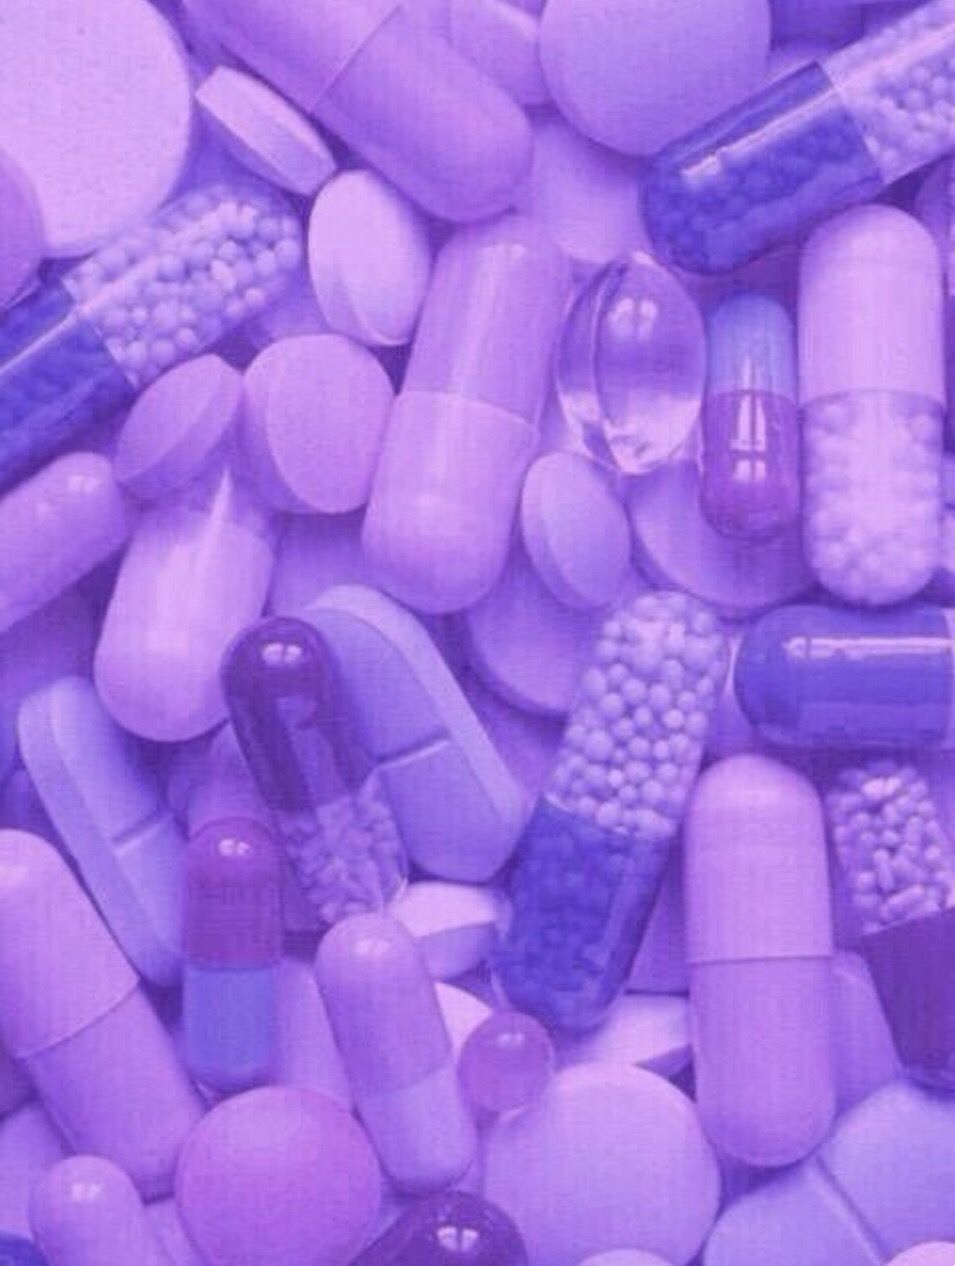 A pile of purple and blue pills - Medical